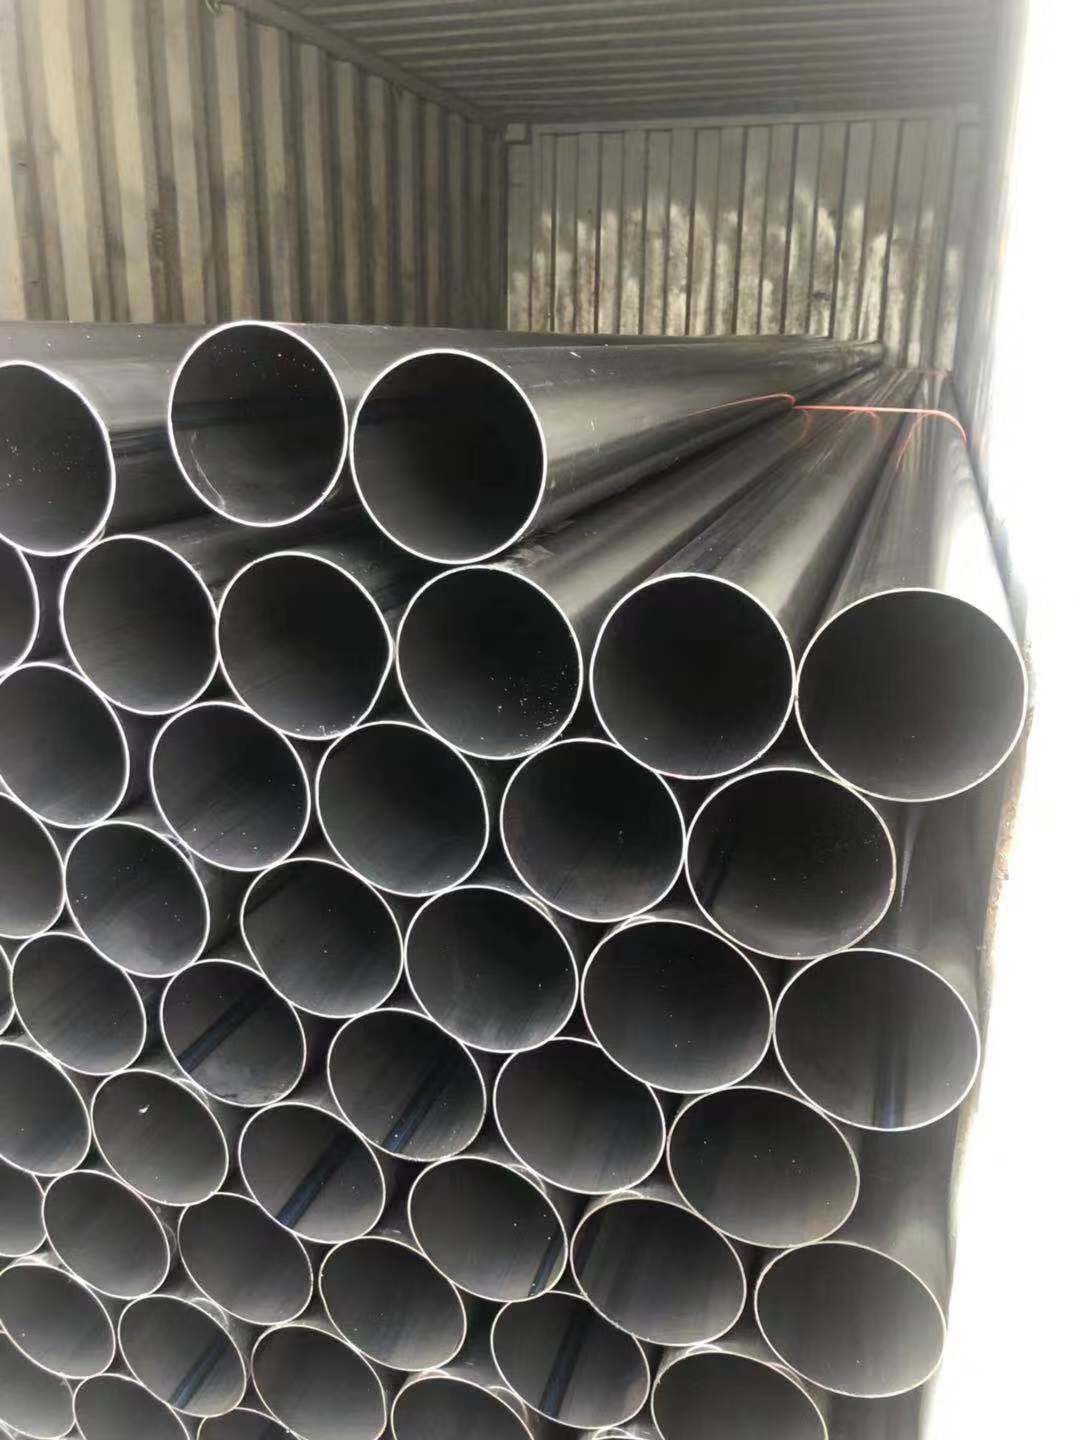 Something about aluminized steel pipes.